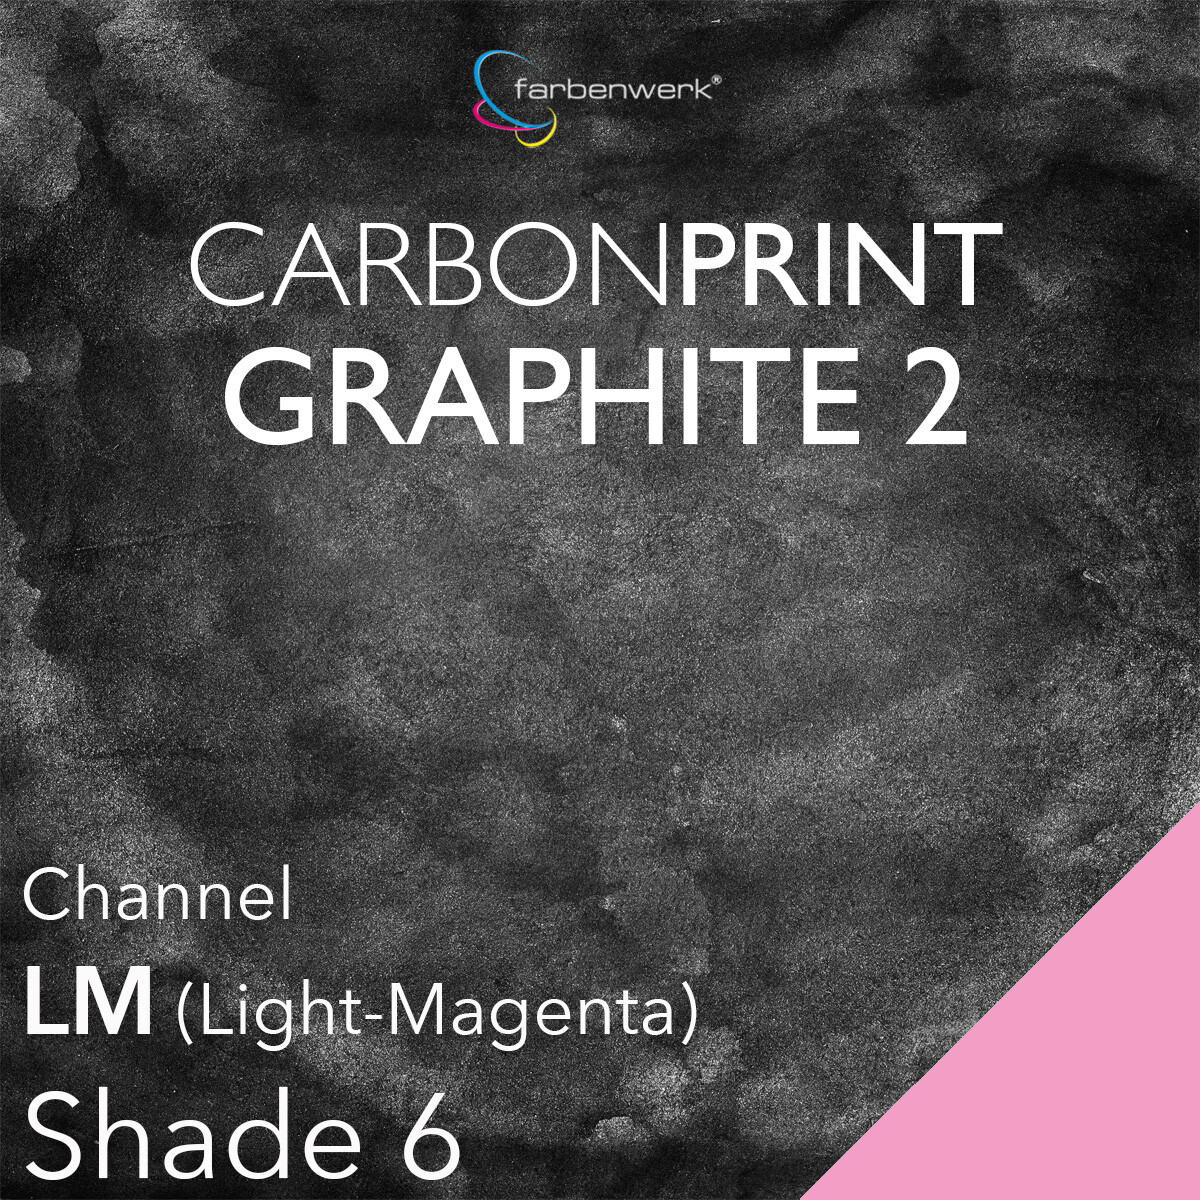 Carbonprint Graphite2 Shade6 Channel LM